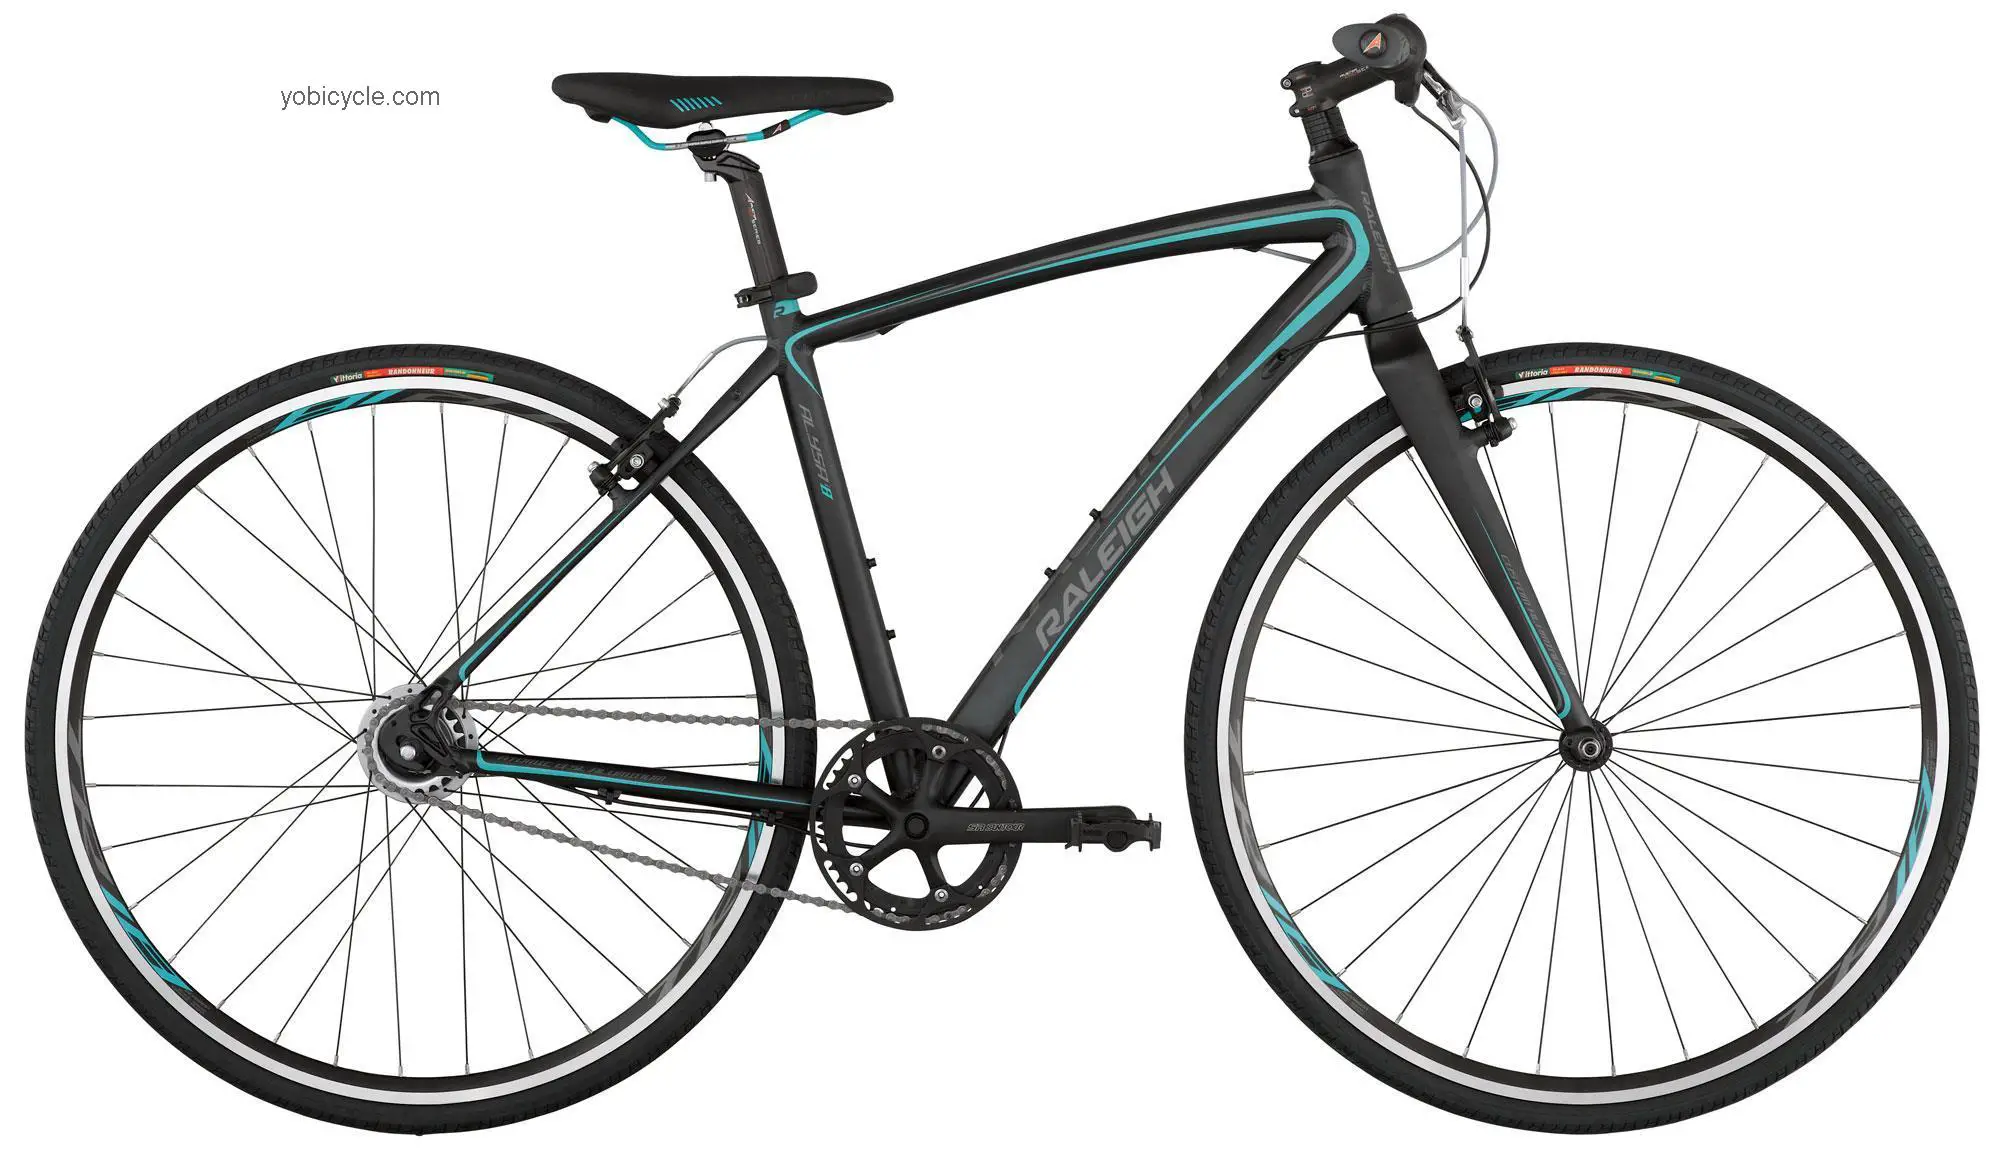 Raleigh  Alysa i8 Technical data and specifications